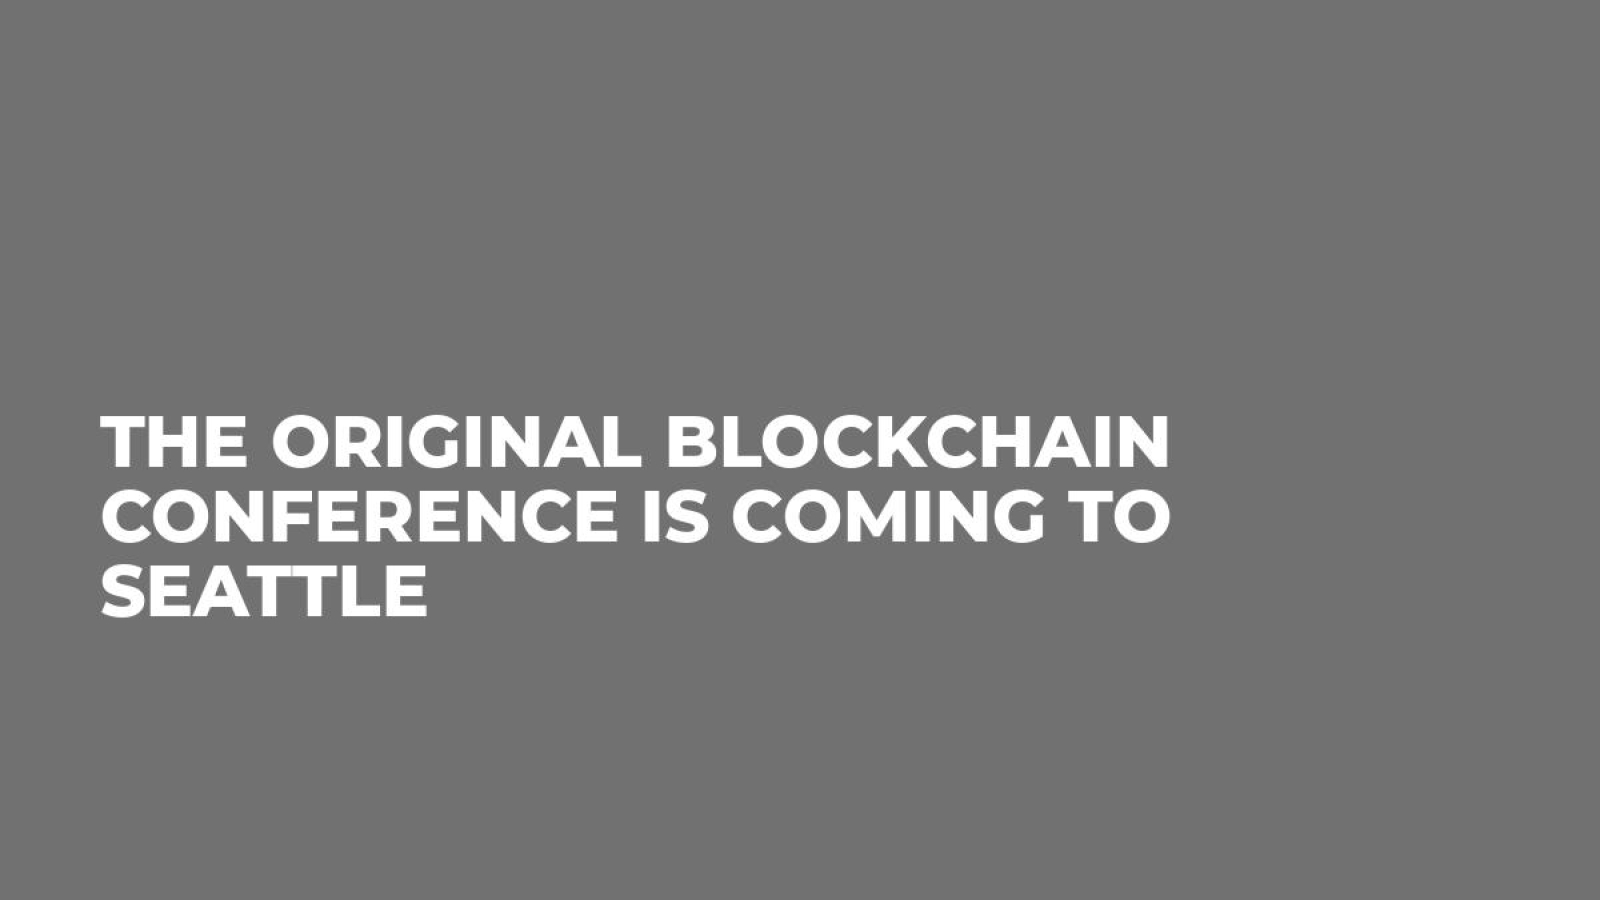 THE ORIGINAL BLOCKCHAIN CONFERENCE IS COMING TO SEATTLE